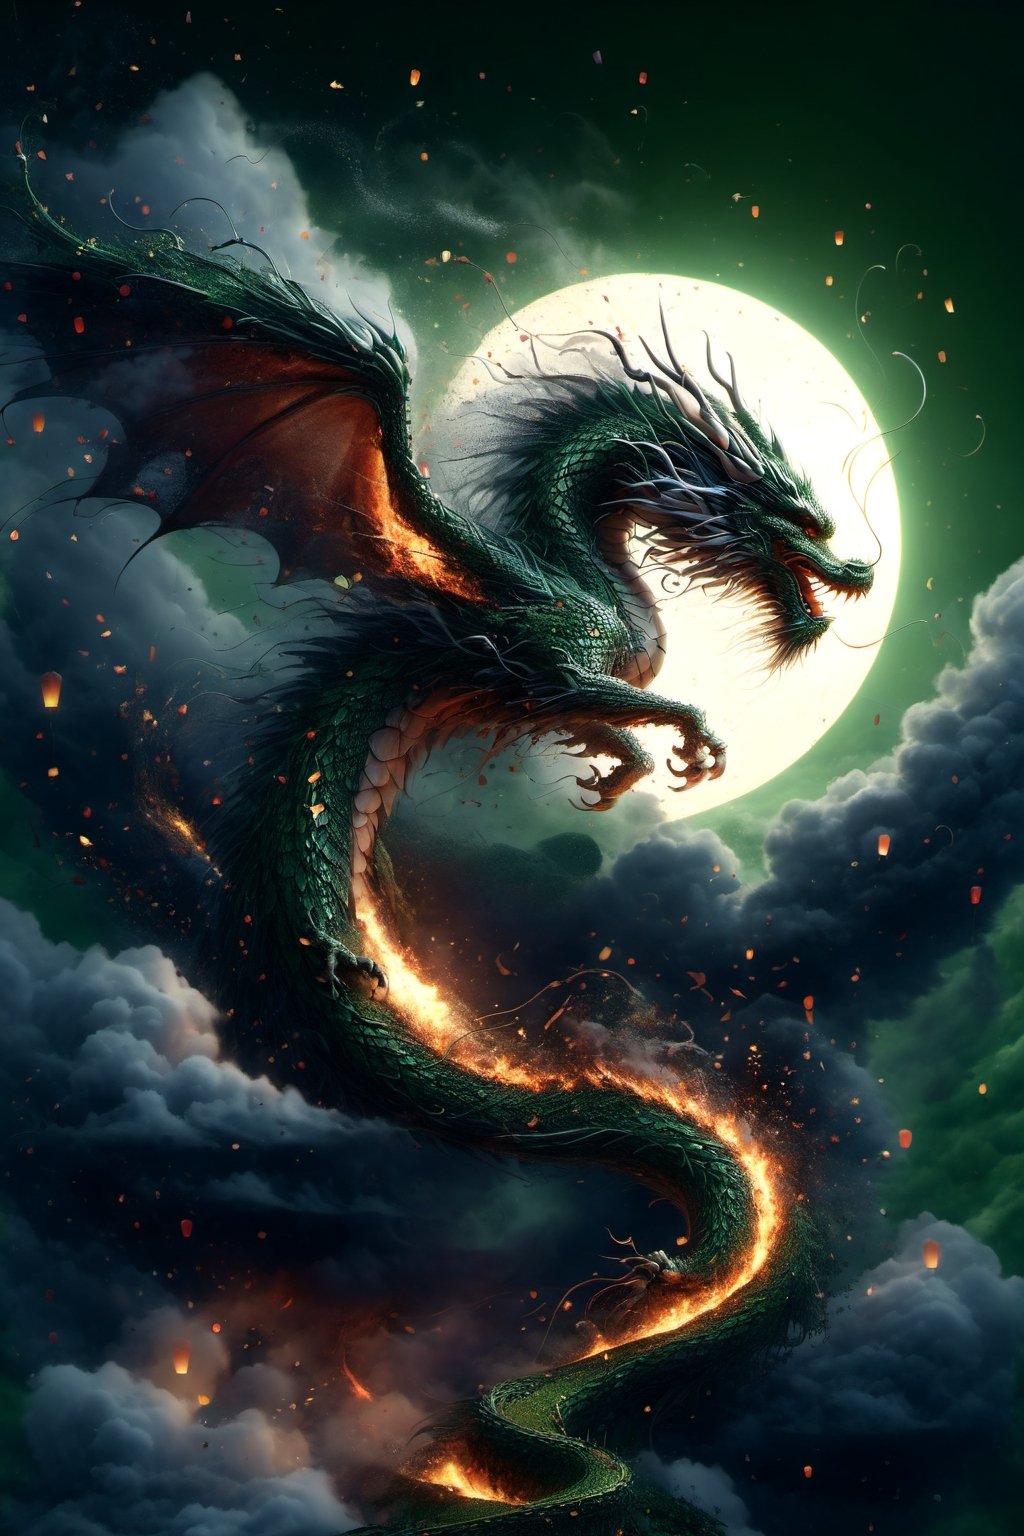 High quality, masterpiece, a western dragon standing on a green slope releasing a breath of fire towards the sky in a stormy night,DragonConfetti2024_XL